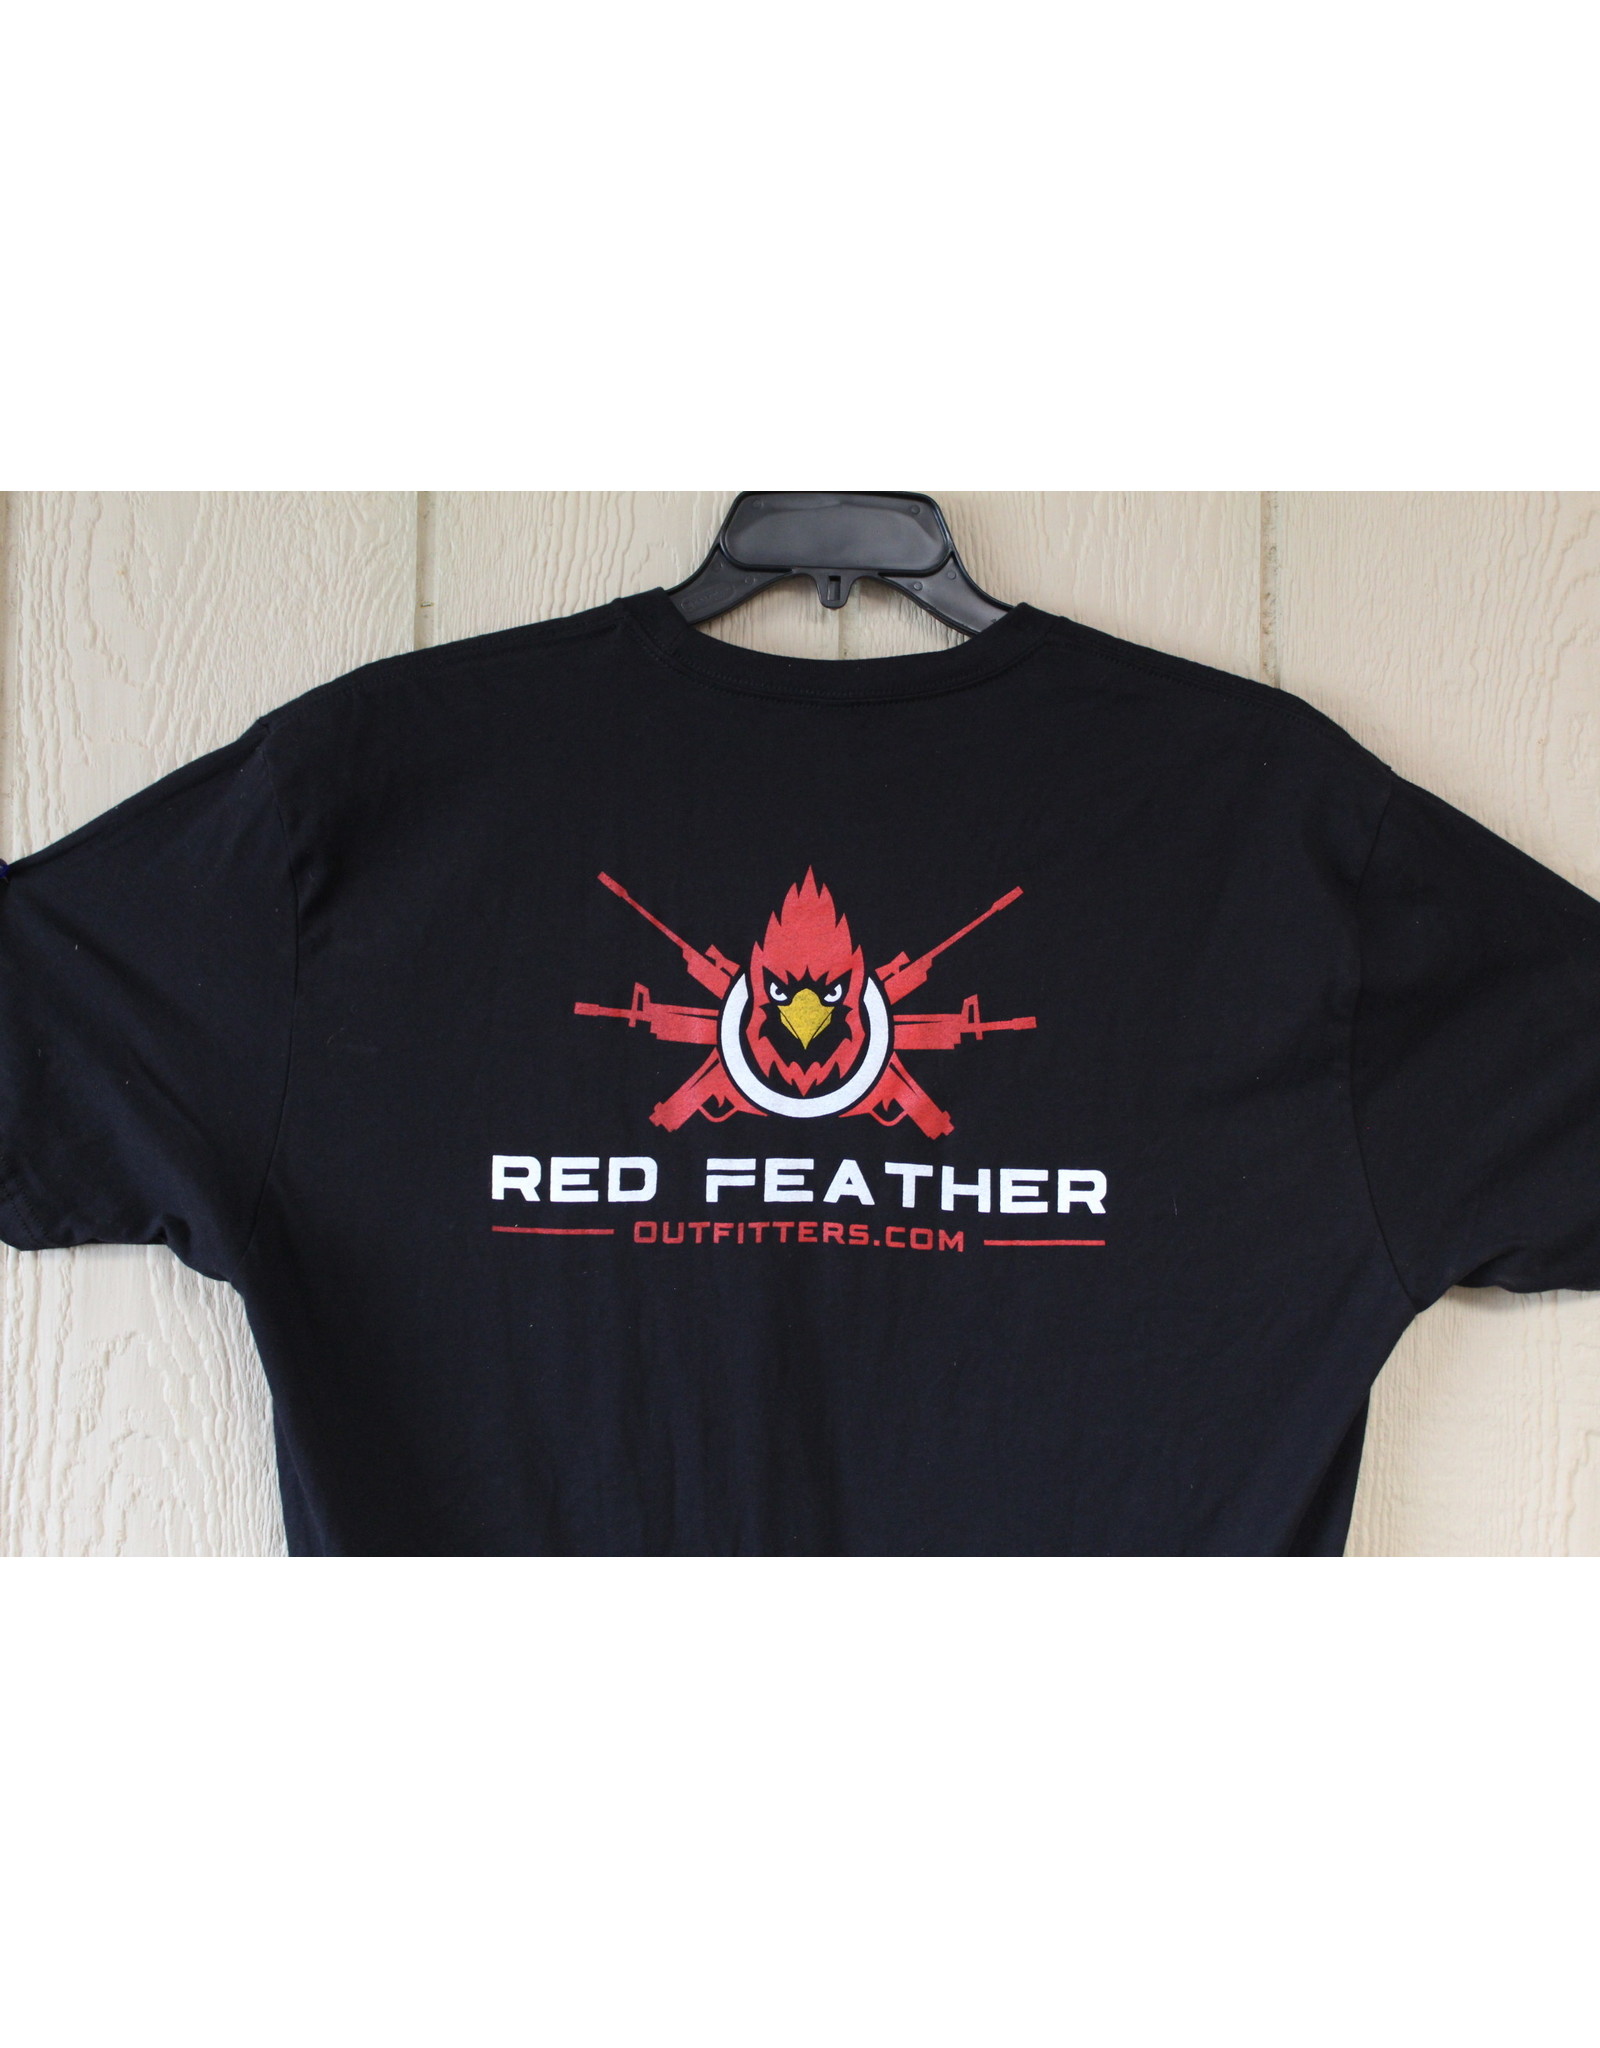 Red Feather Outfitters - Black Performance Shirt